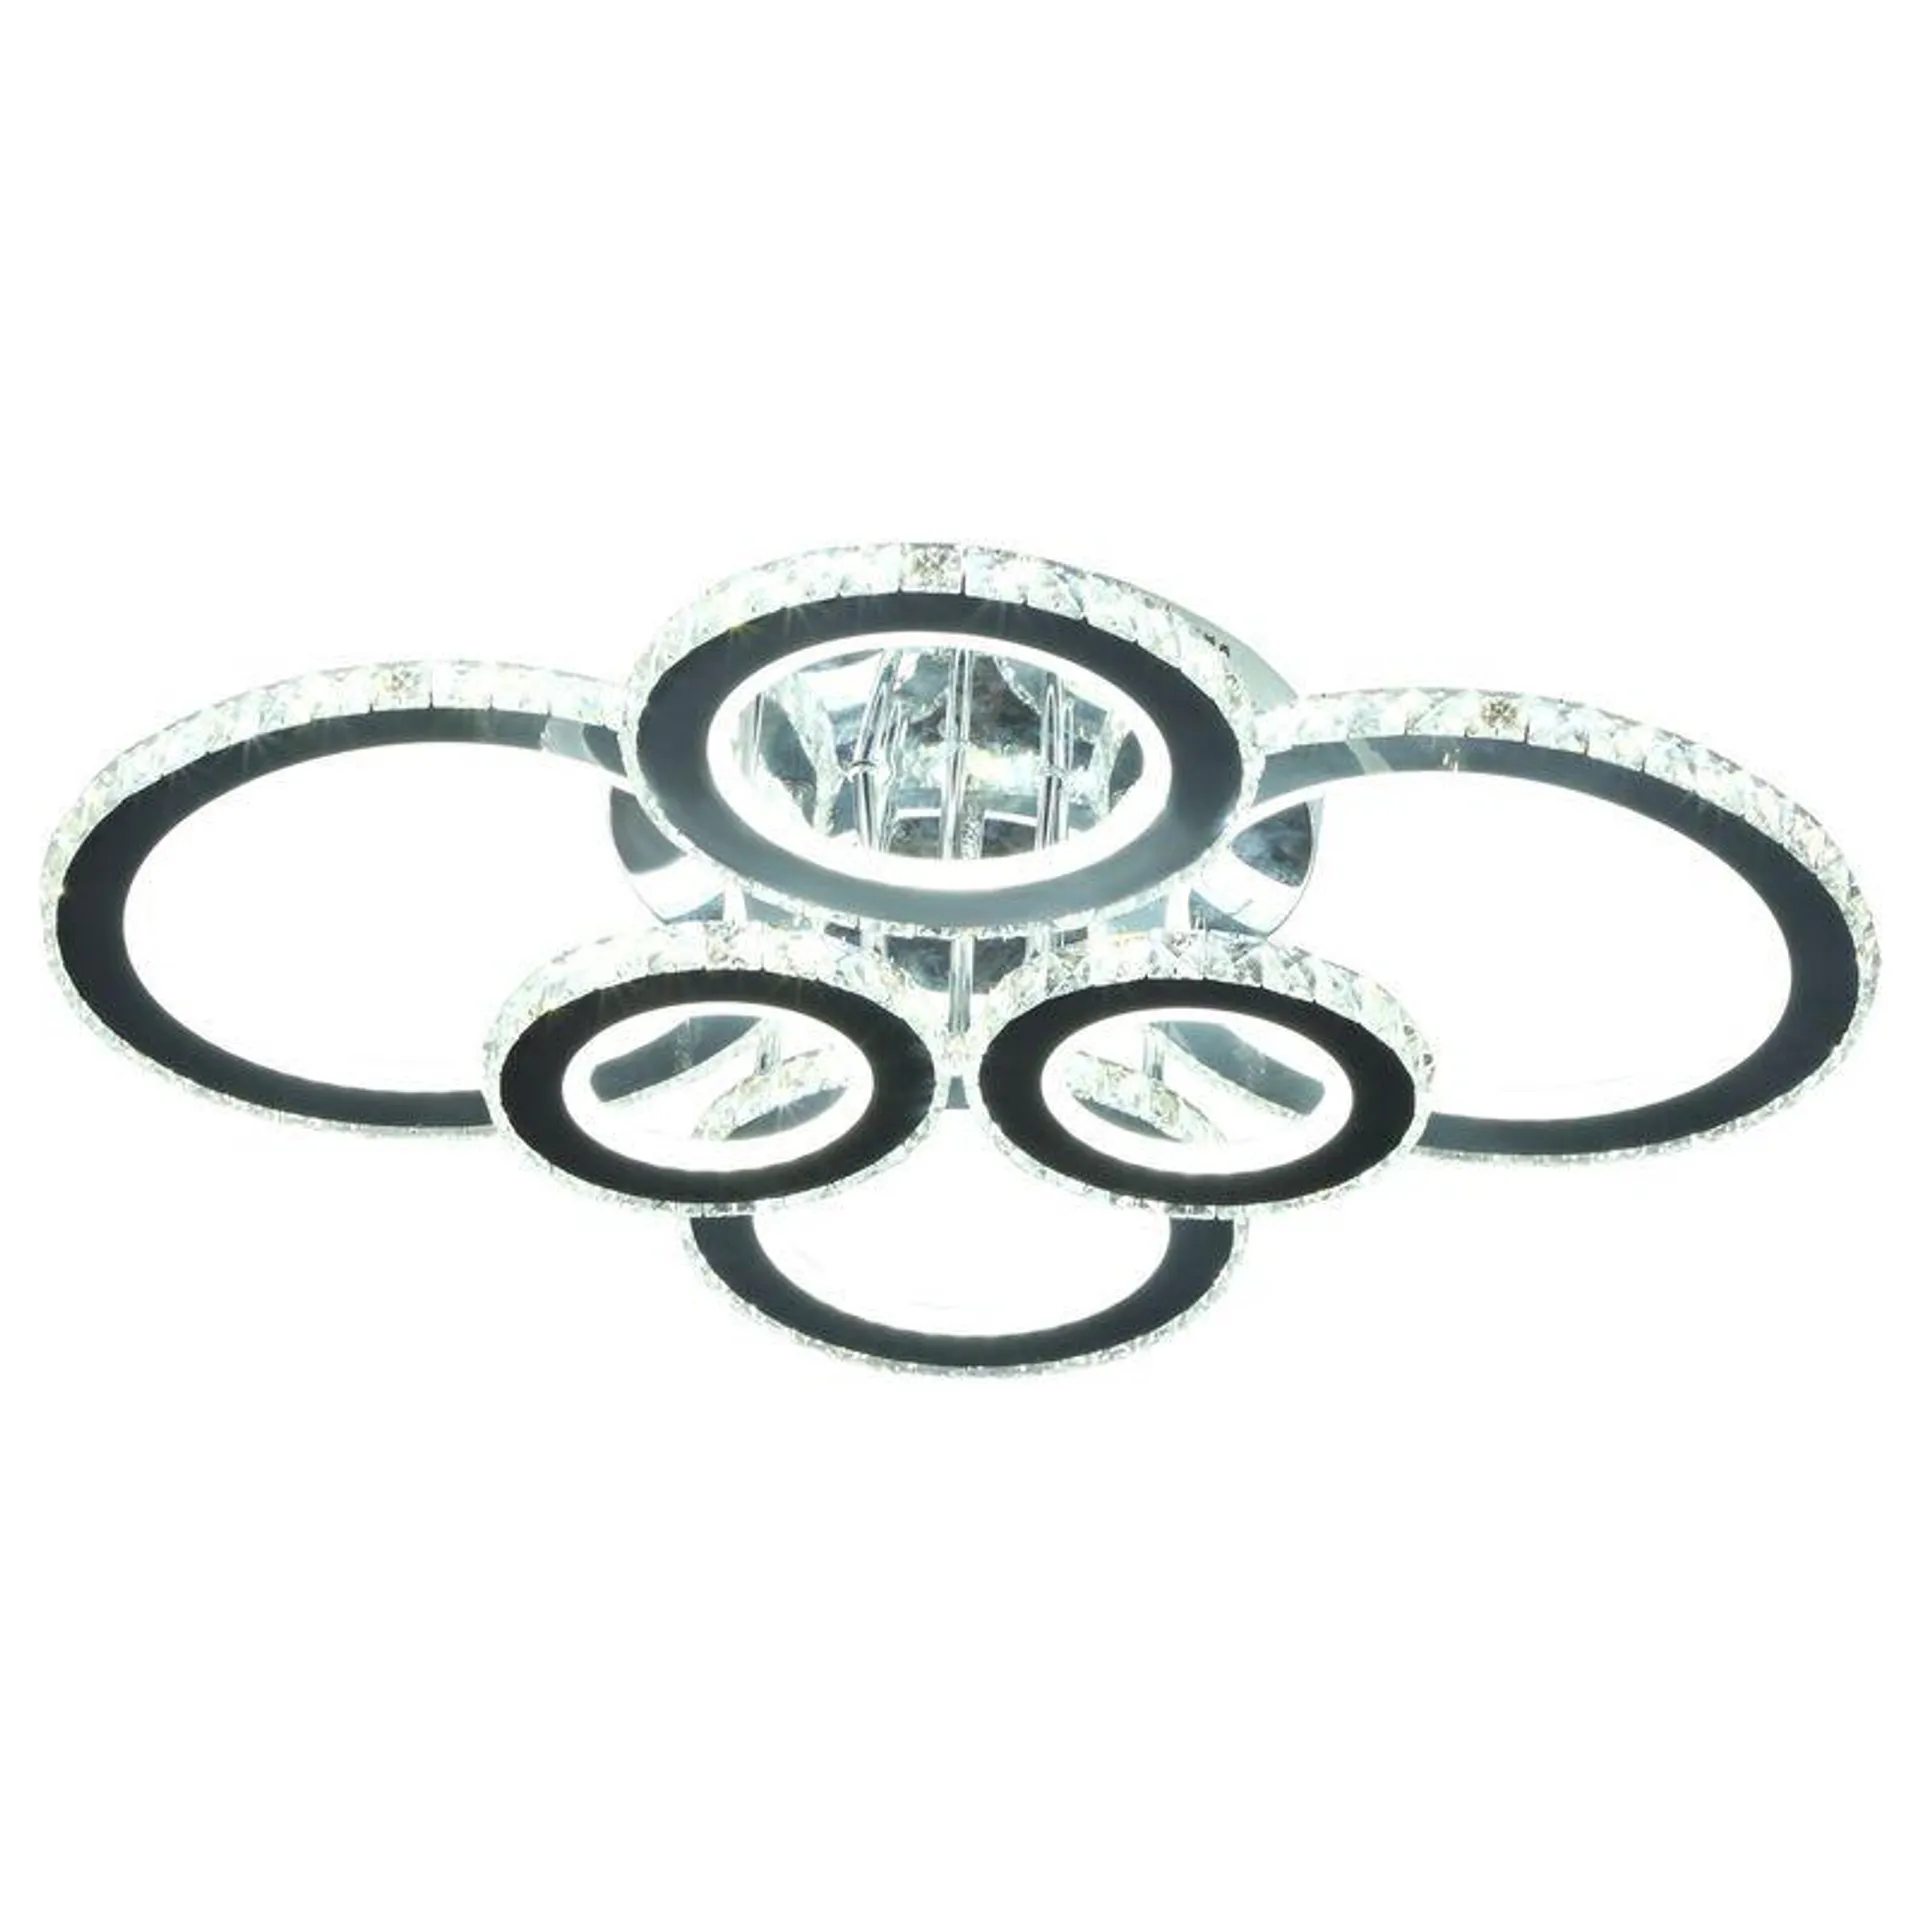 Elegant LED Chandelier with 6 Rings, Ceiling Light with Cool White Lighting for Living Room, Dining Room, or Bedroom, Silver